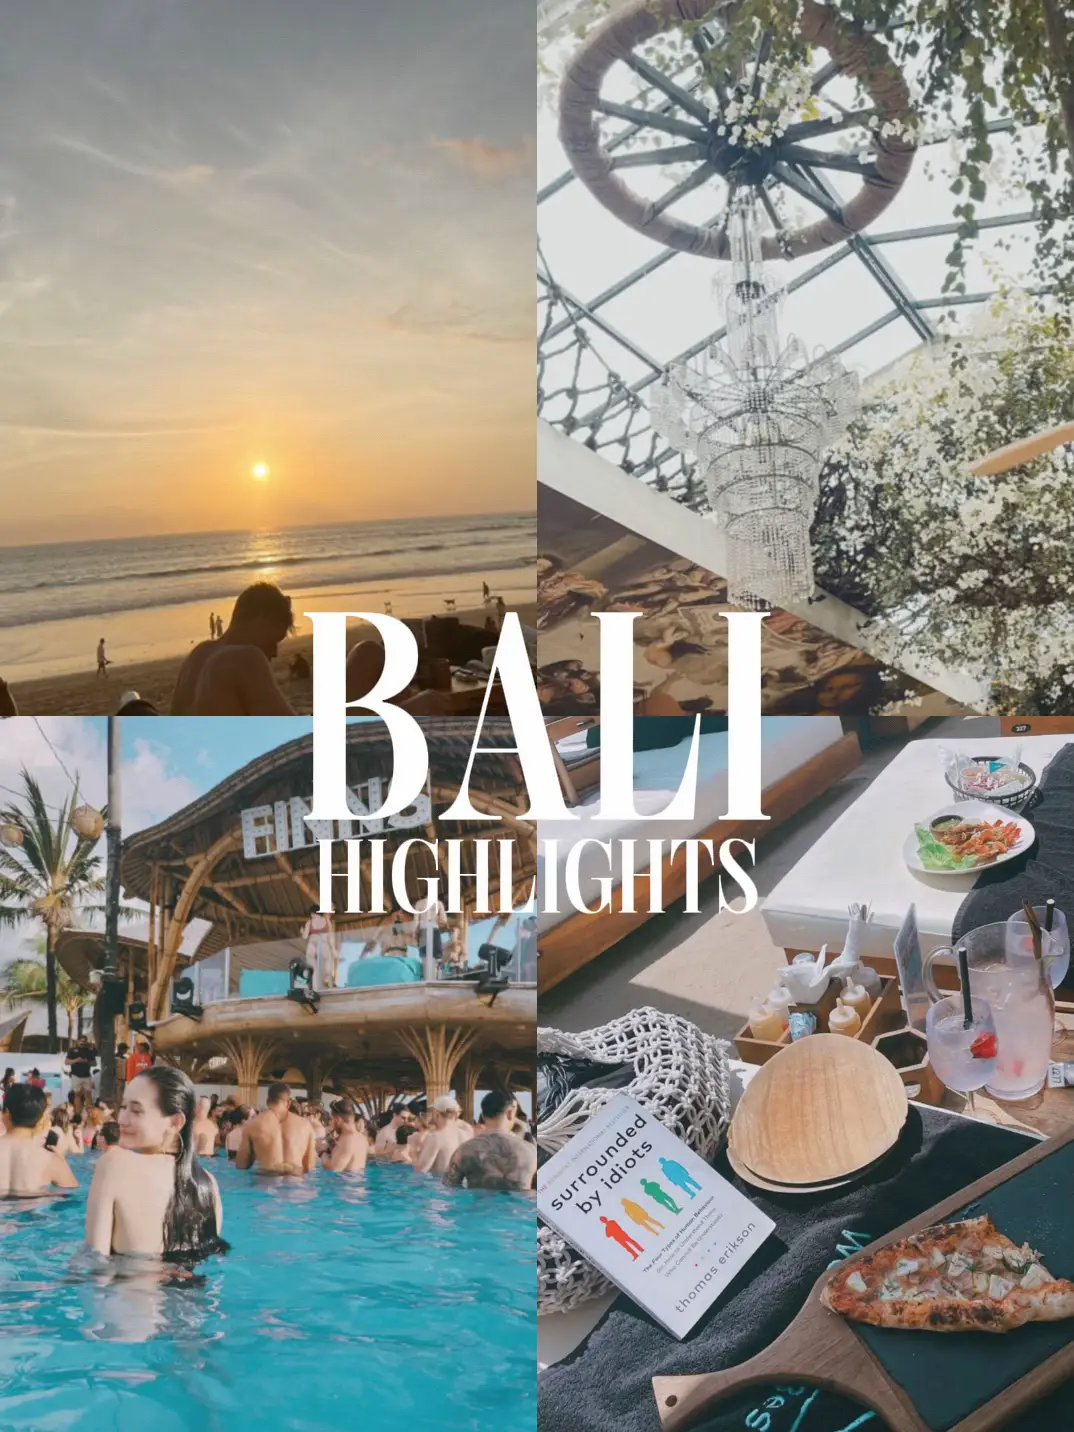 HIGHLIGHTS OF MY 4D3N WELLNESS BALI TRIP's images(0)